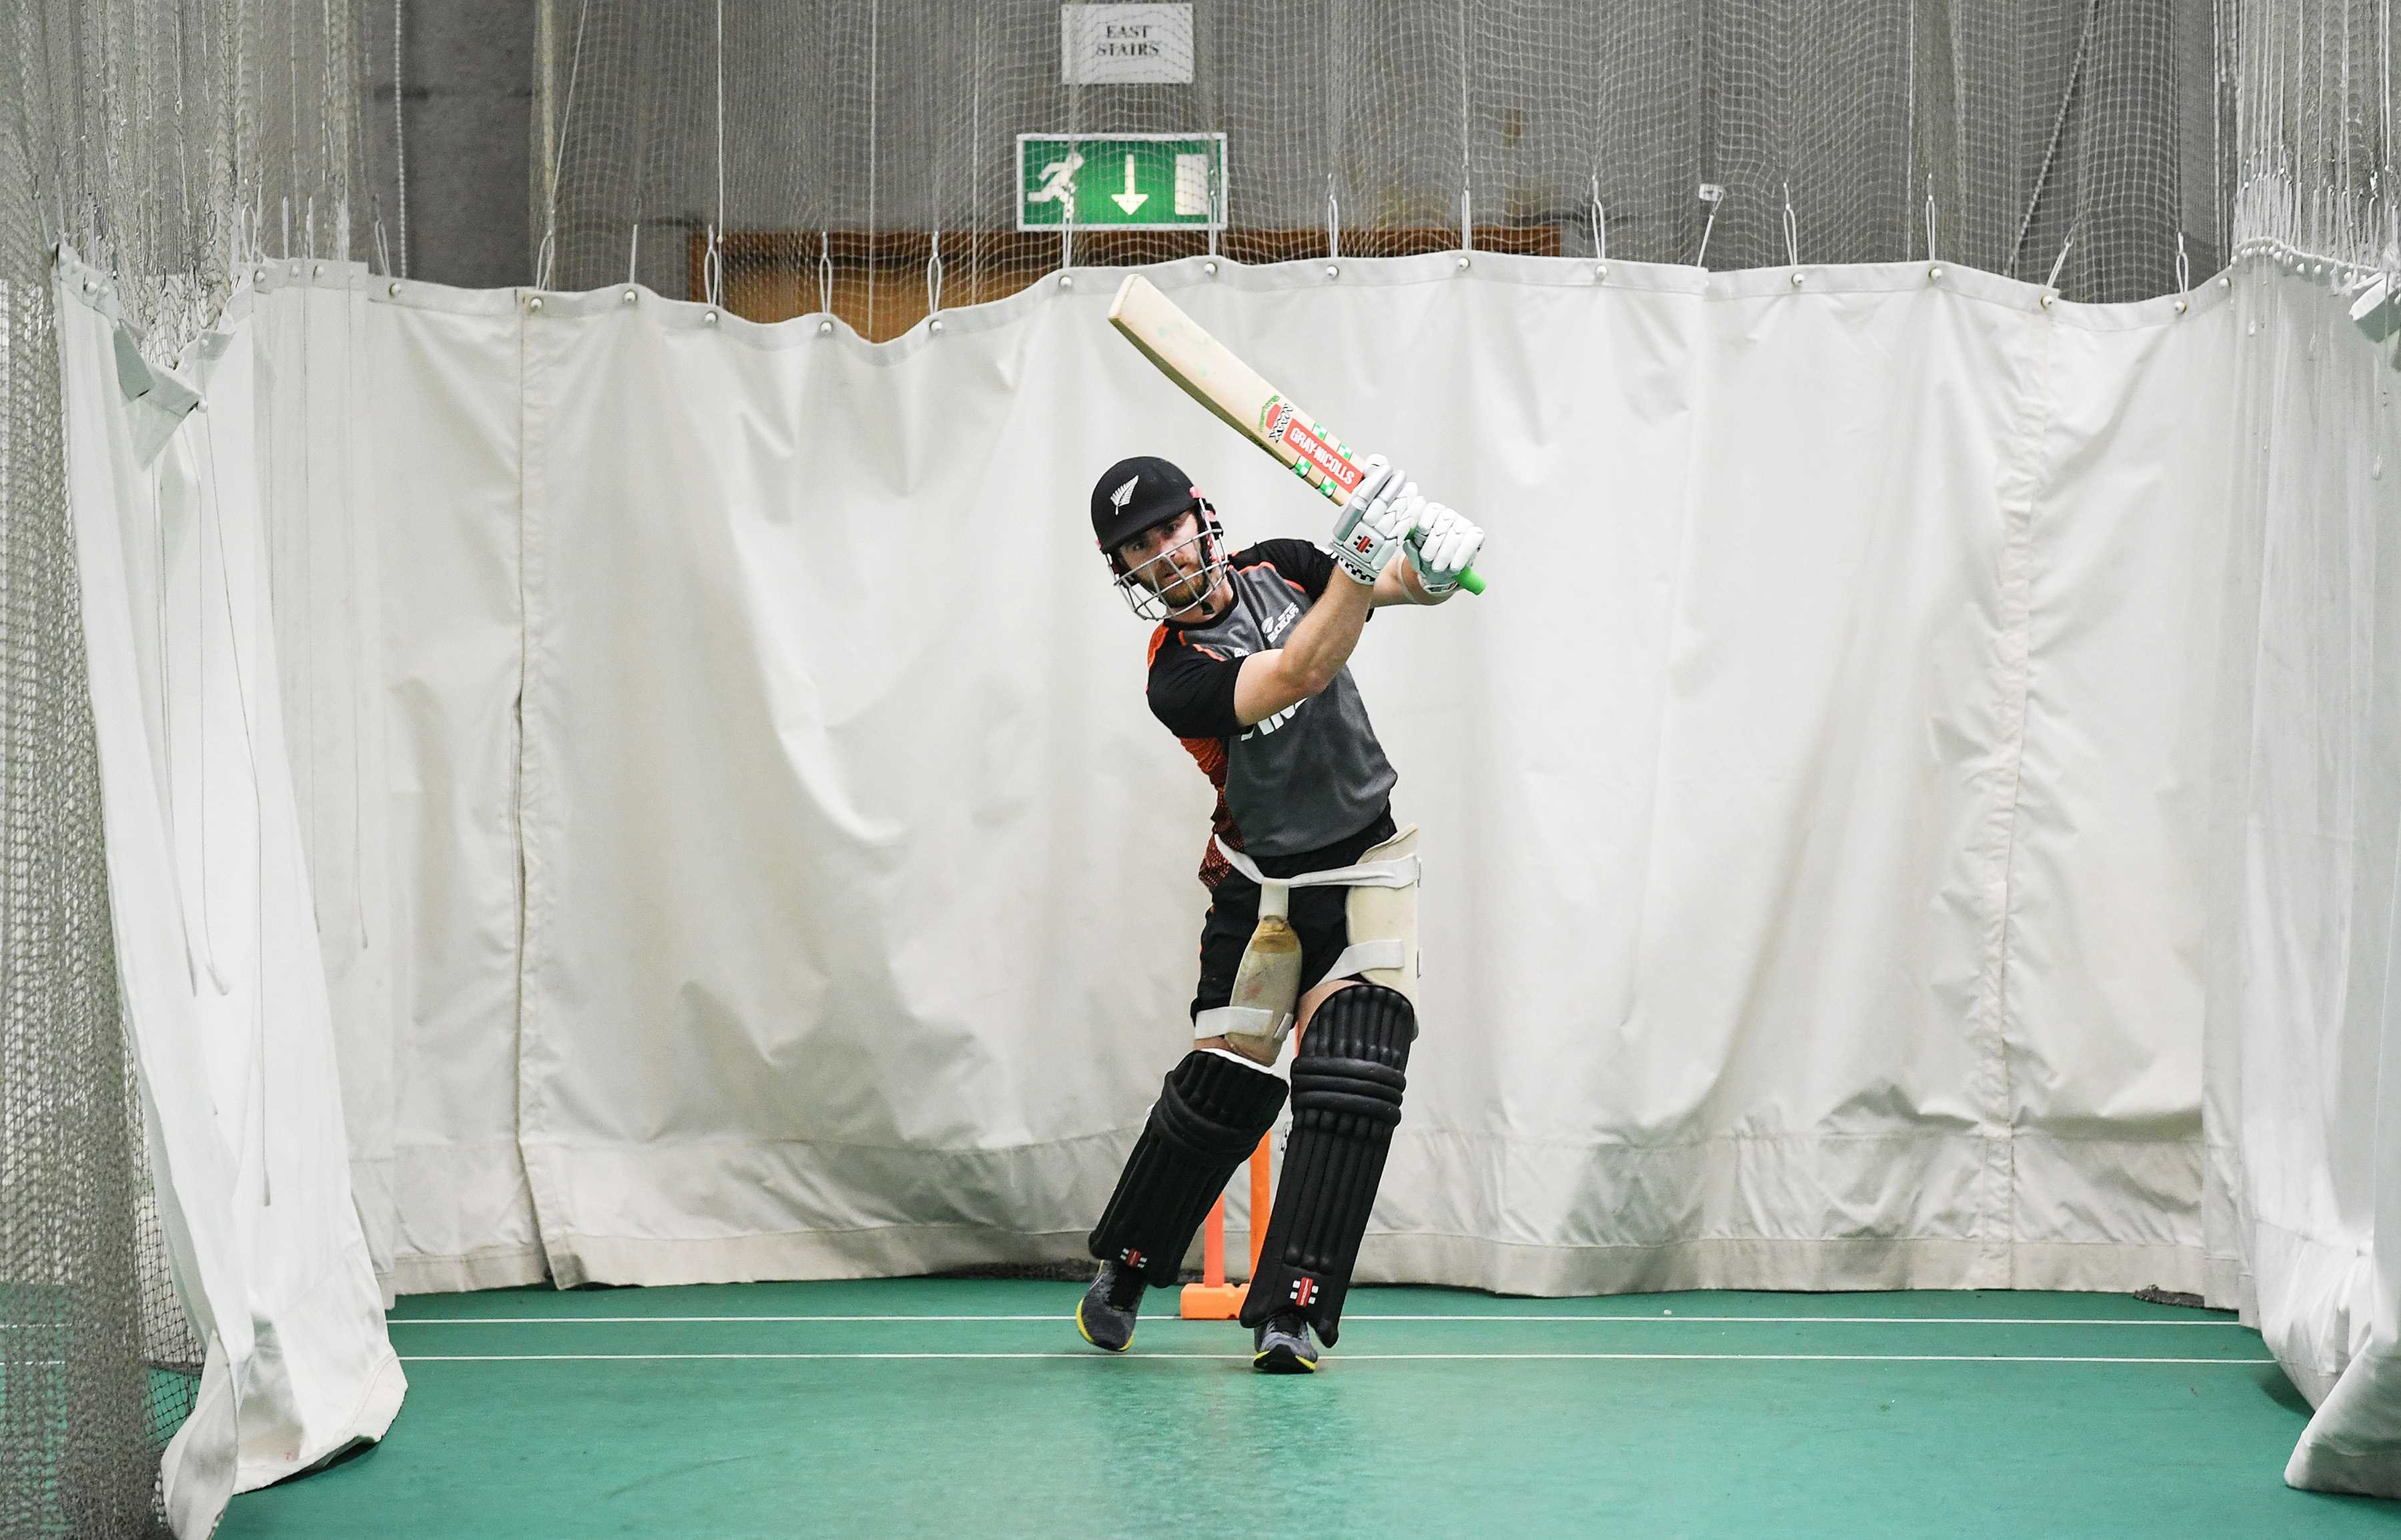 New Zealand captain Kane Williamson during an indoor nets session at Trent Bridge ahead of the match against India. ICC Cricket World Cup 2019. Nottinghamshire County Cricket Club, England, UK. Tuesday 11 June 2019. © Copyright Photo: Andrew Cornaga / www.photosport.nz